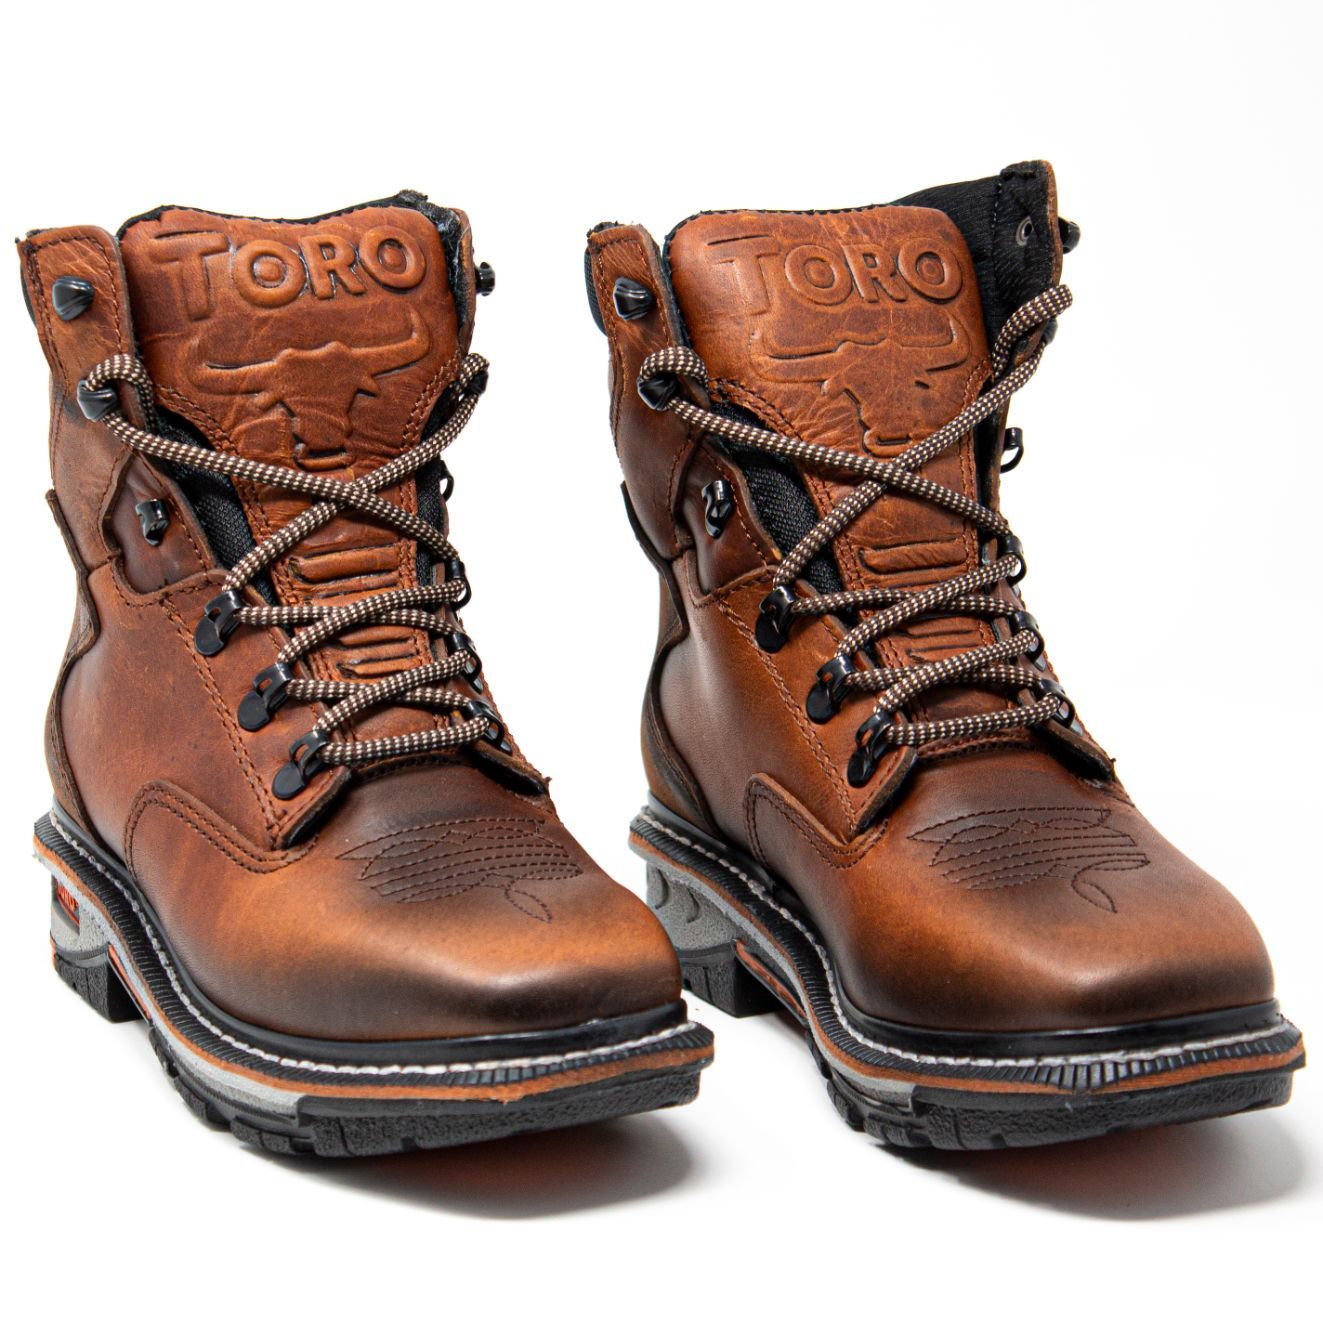 Women's Work Boots - 3-Layer Sole & Soft Toe - Tan Work Boots - Toro Bravo - 8" Work Boots - Tan 8in Work Boots